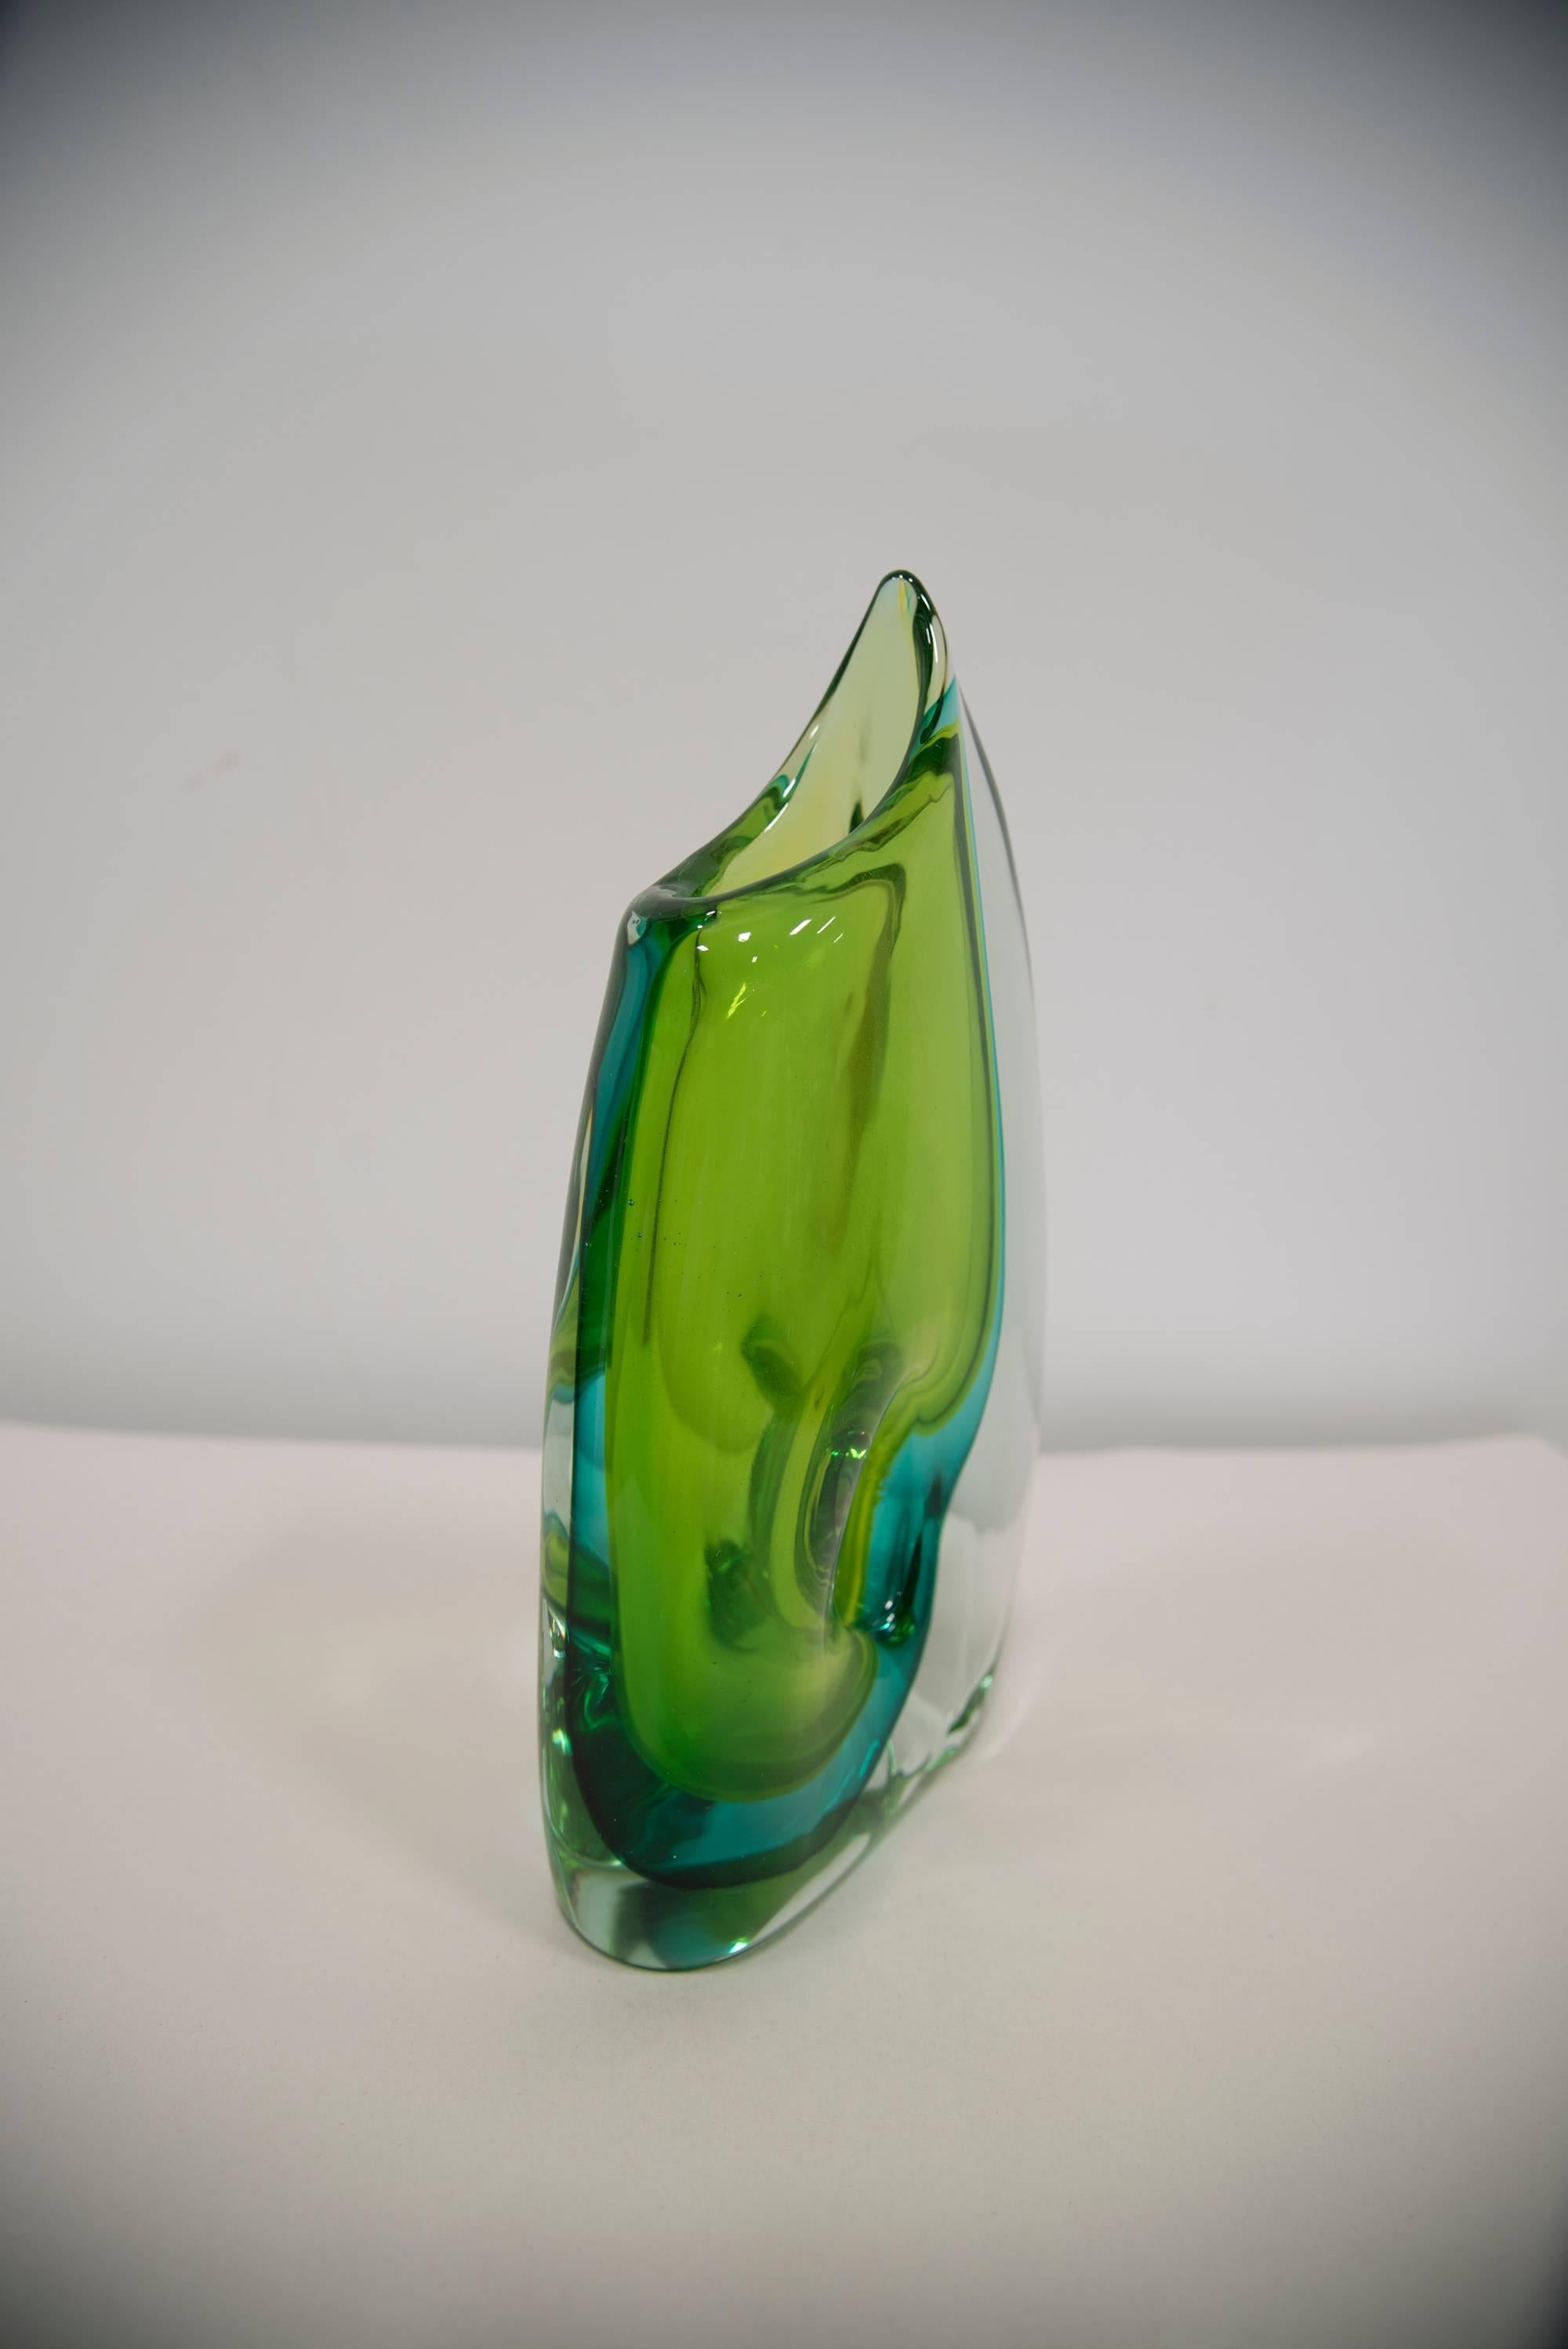 A vintage abstract glass sculpture designed by Luciano Gaspari, circa 1960.